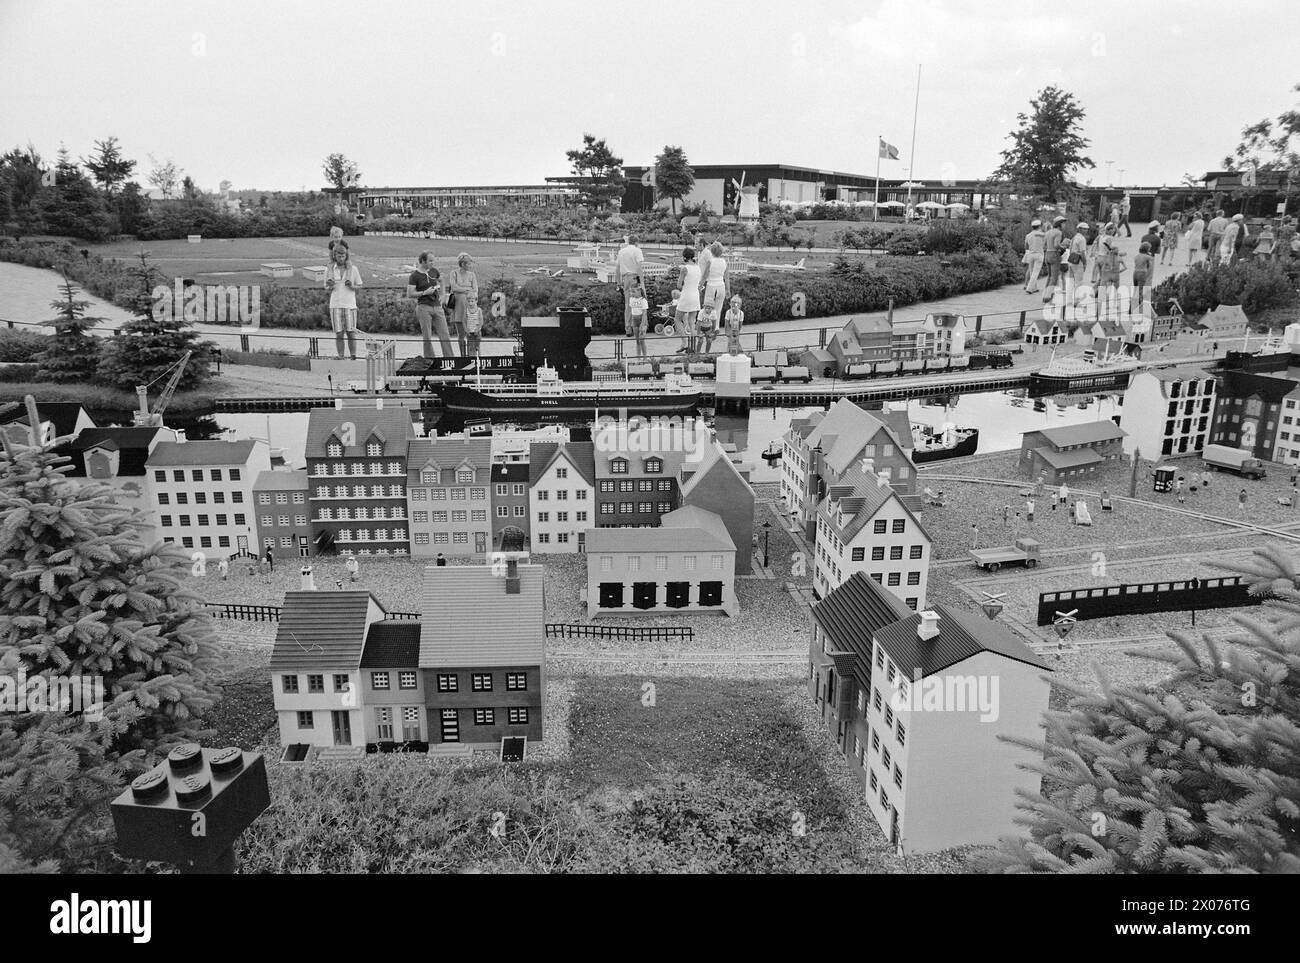 Current 30 - 6 - 1973: Playland for young and oldLegoland is a mini-kingdom that lives only on tourism. Last year, this fantasy world near Billund in Denmark was visited by no less than 777,000 enthusiastic people – young and old. The peak visit in one day is 20,000 people. Legoland is an adventure world for children, but it still attracts more adults. Last year, fully 70 per cent of the visitors were adults.  The houses in Legoland have an average height of about one metre. The cities consist of old and new districts and everything is built historically and architecturally correctly according Stock Photo